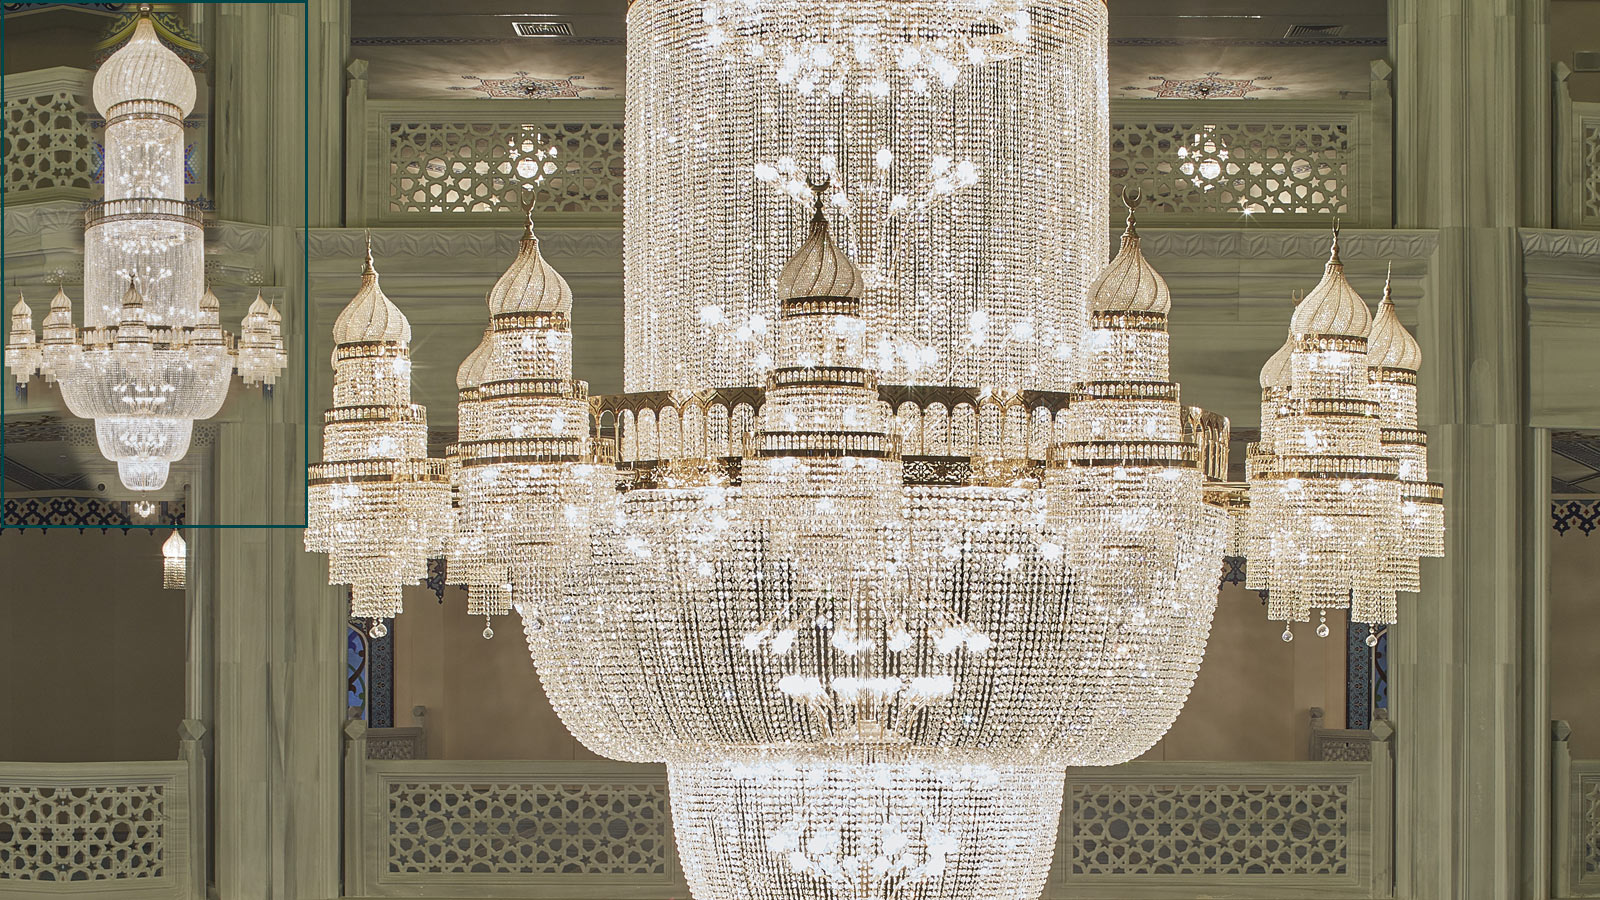 Moscow Central Mosque Chandelier